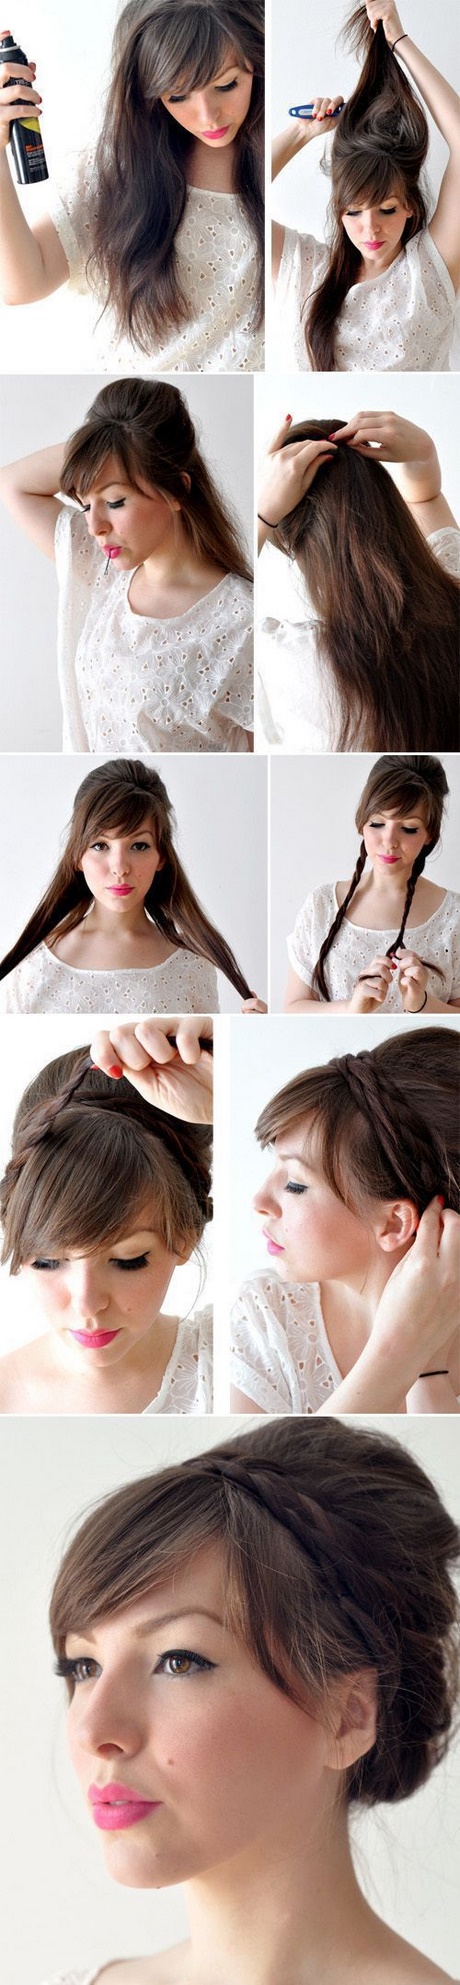 hairstyles-at-home-74_2 Hairstyles at home